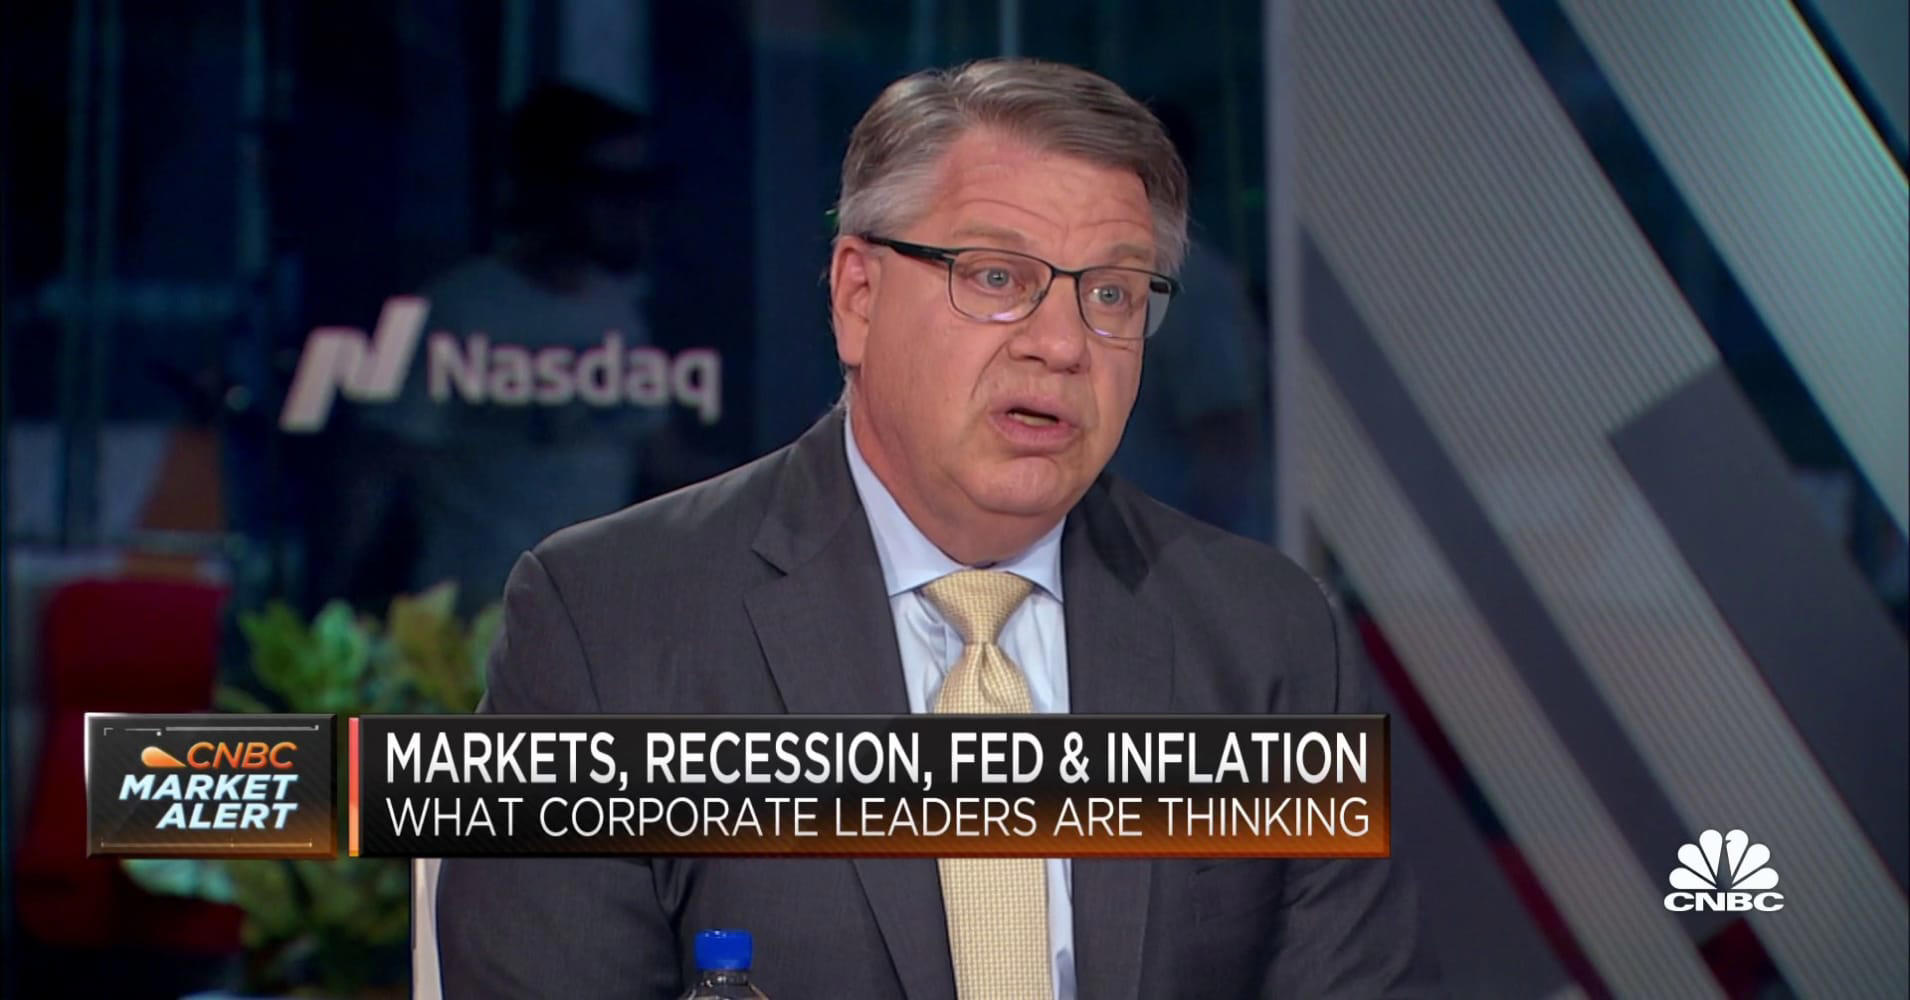 BCG's Rich Lesser: There is a focus on resilience and productivity ...